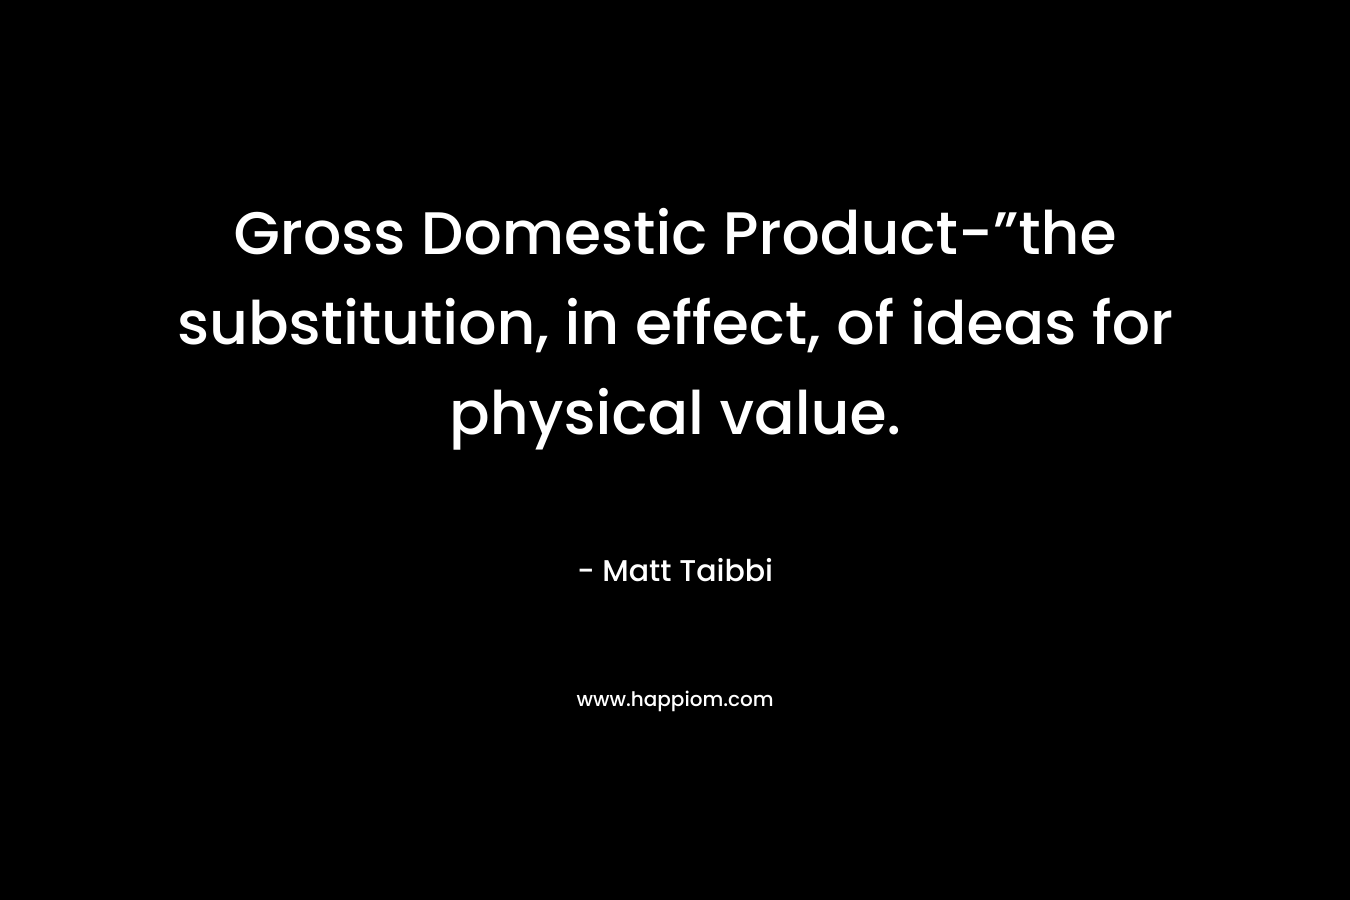 Gross Domestic Product-”the substitution, in effect, of ideas for physical value. – Matt Taibbi